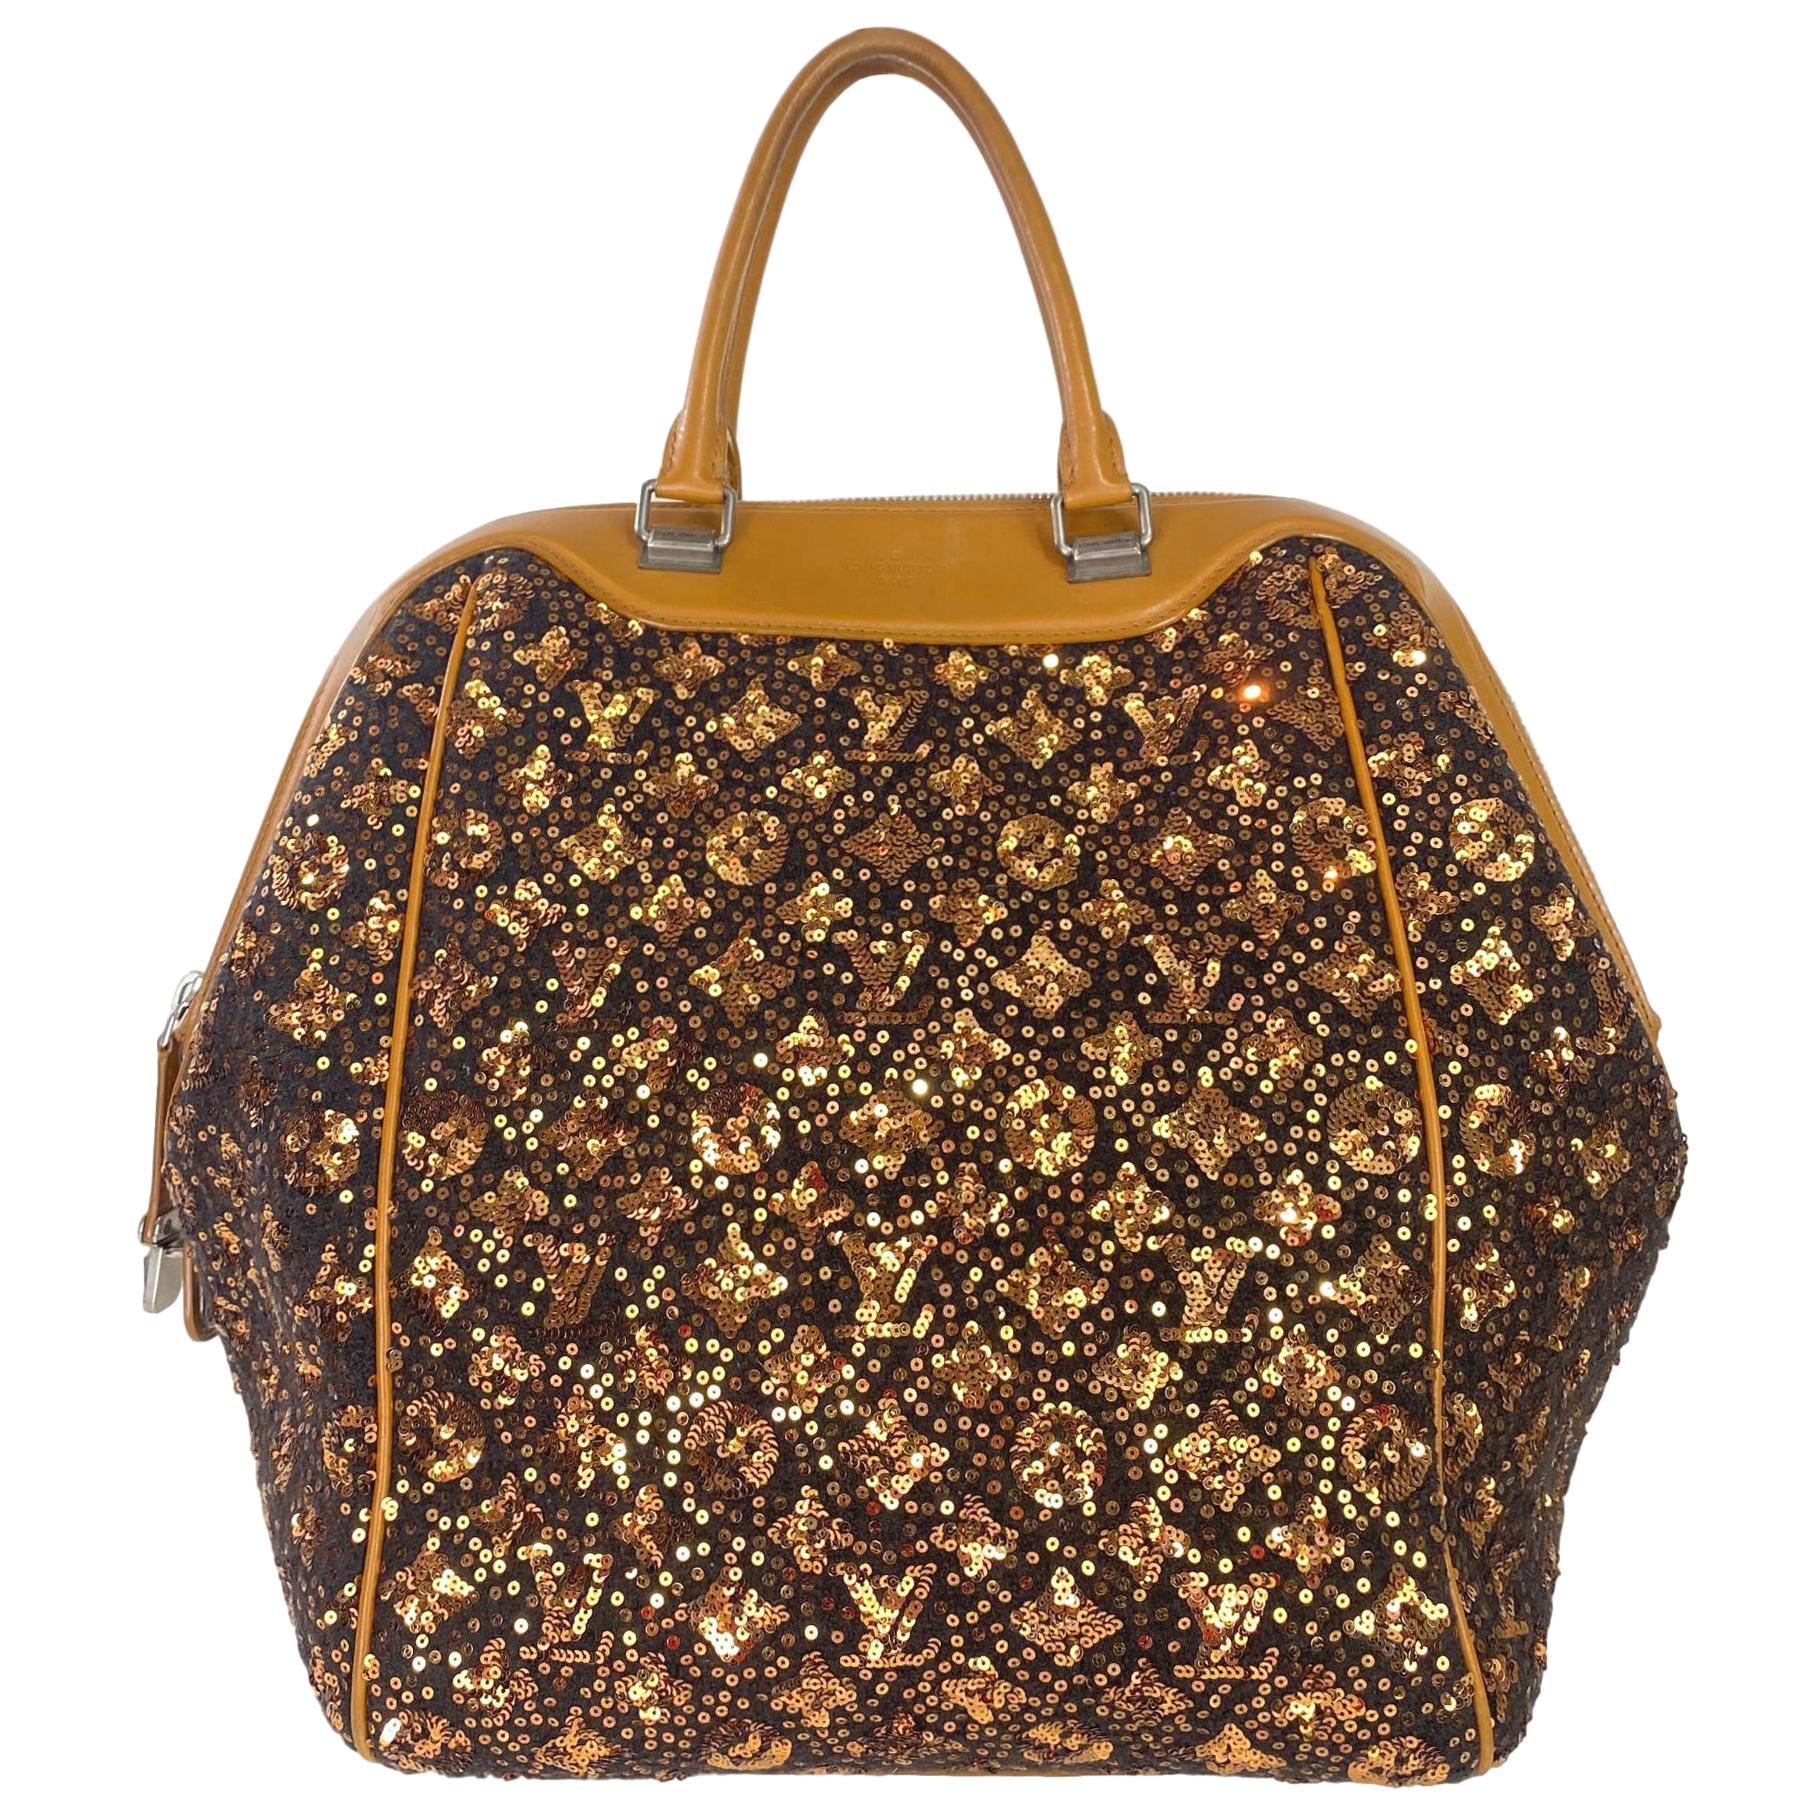 Limited Edition Louis Vuitton North South Sunshine Express Sequin Bag